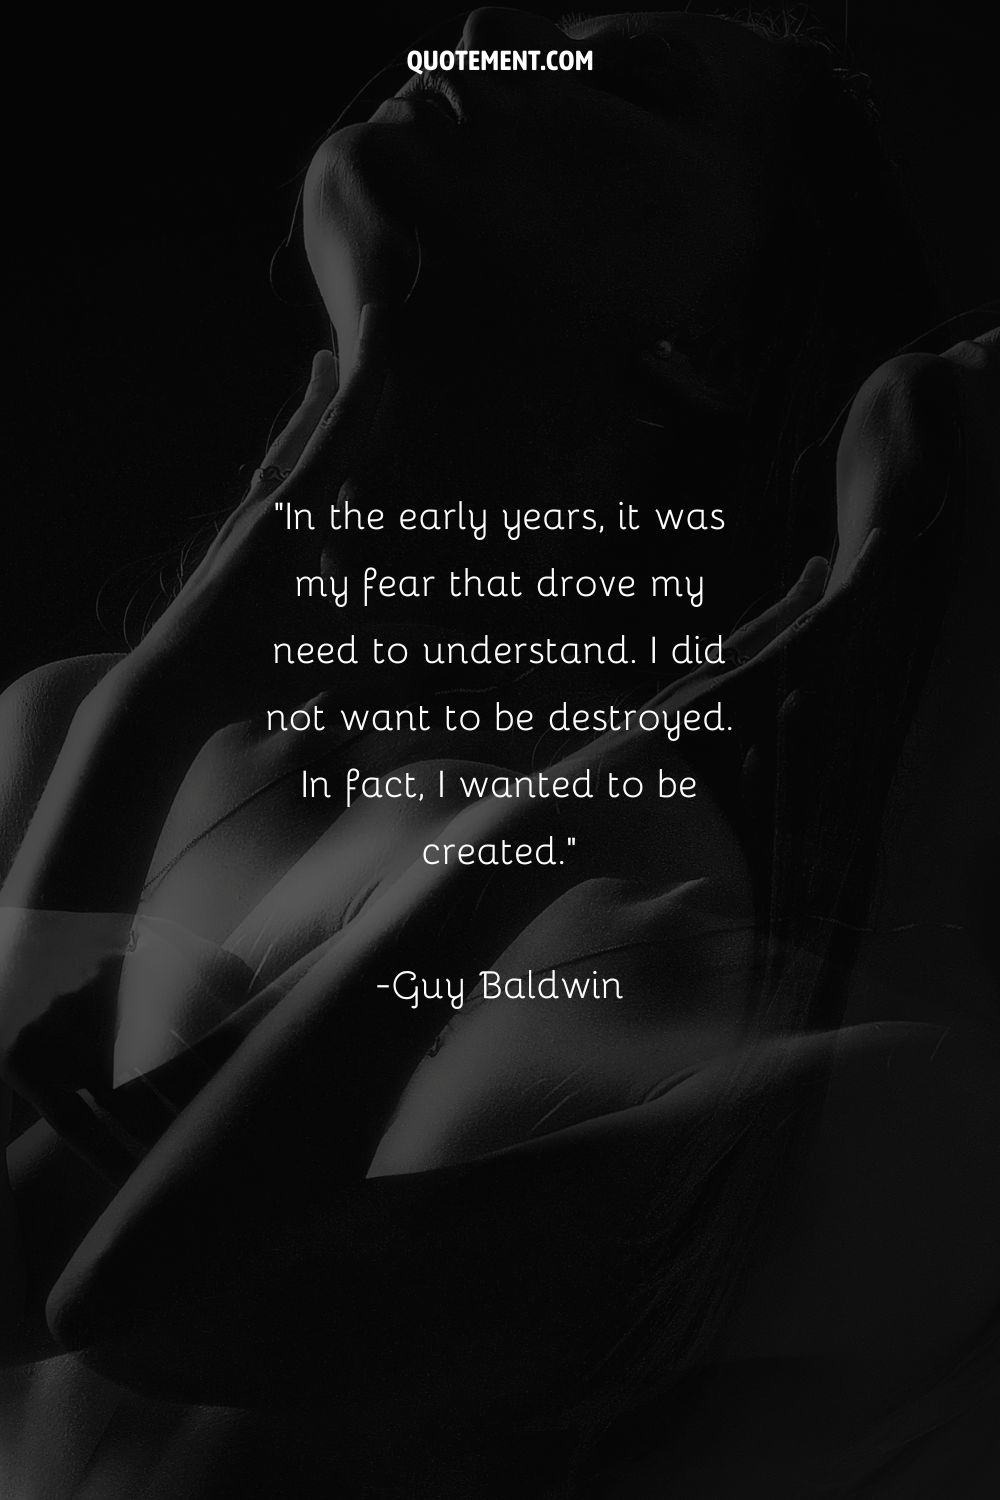 black and white image of a woman representing a quote by Guy Baldwin